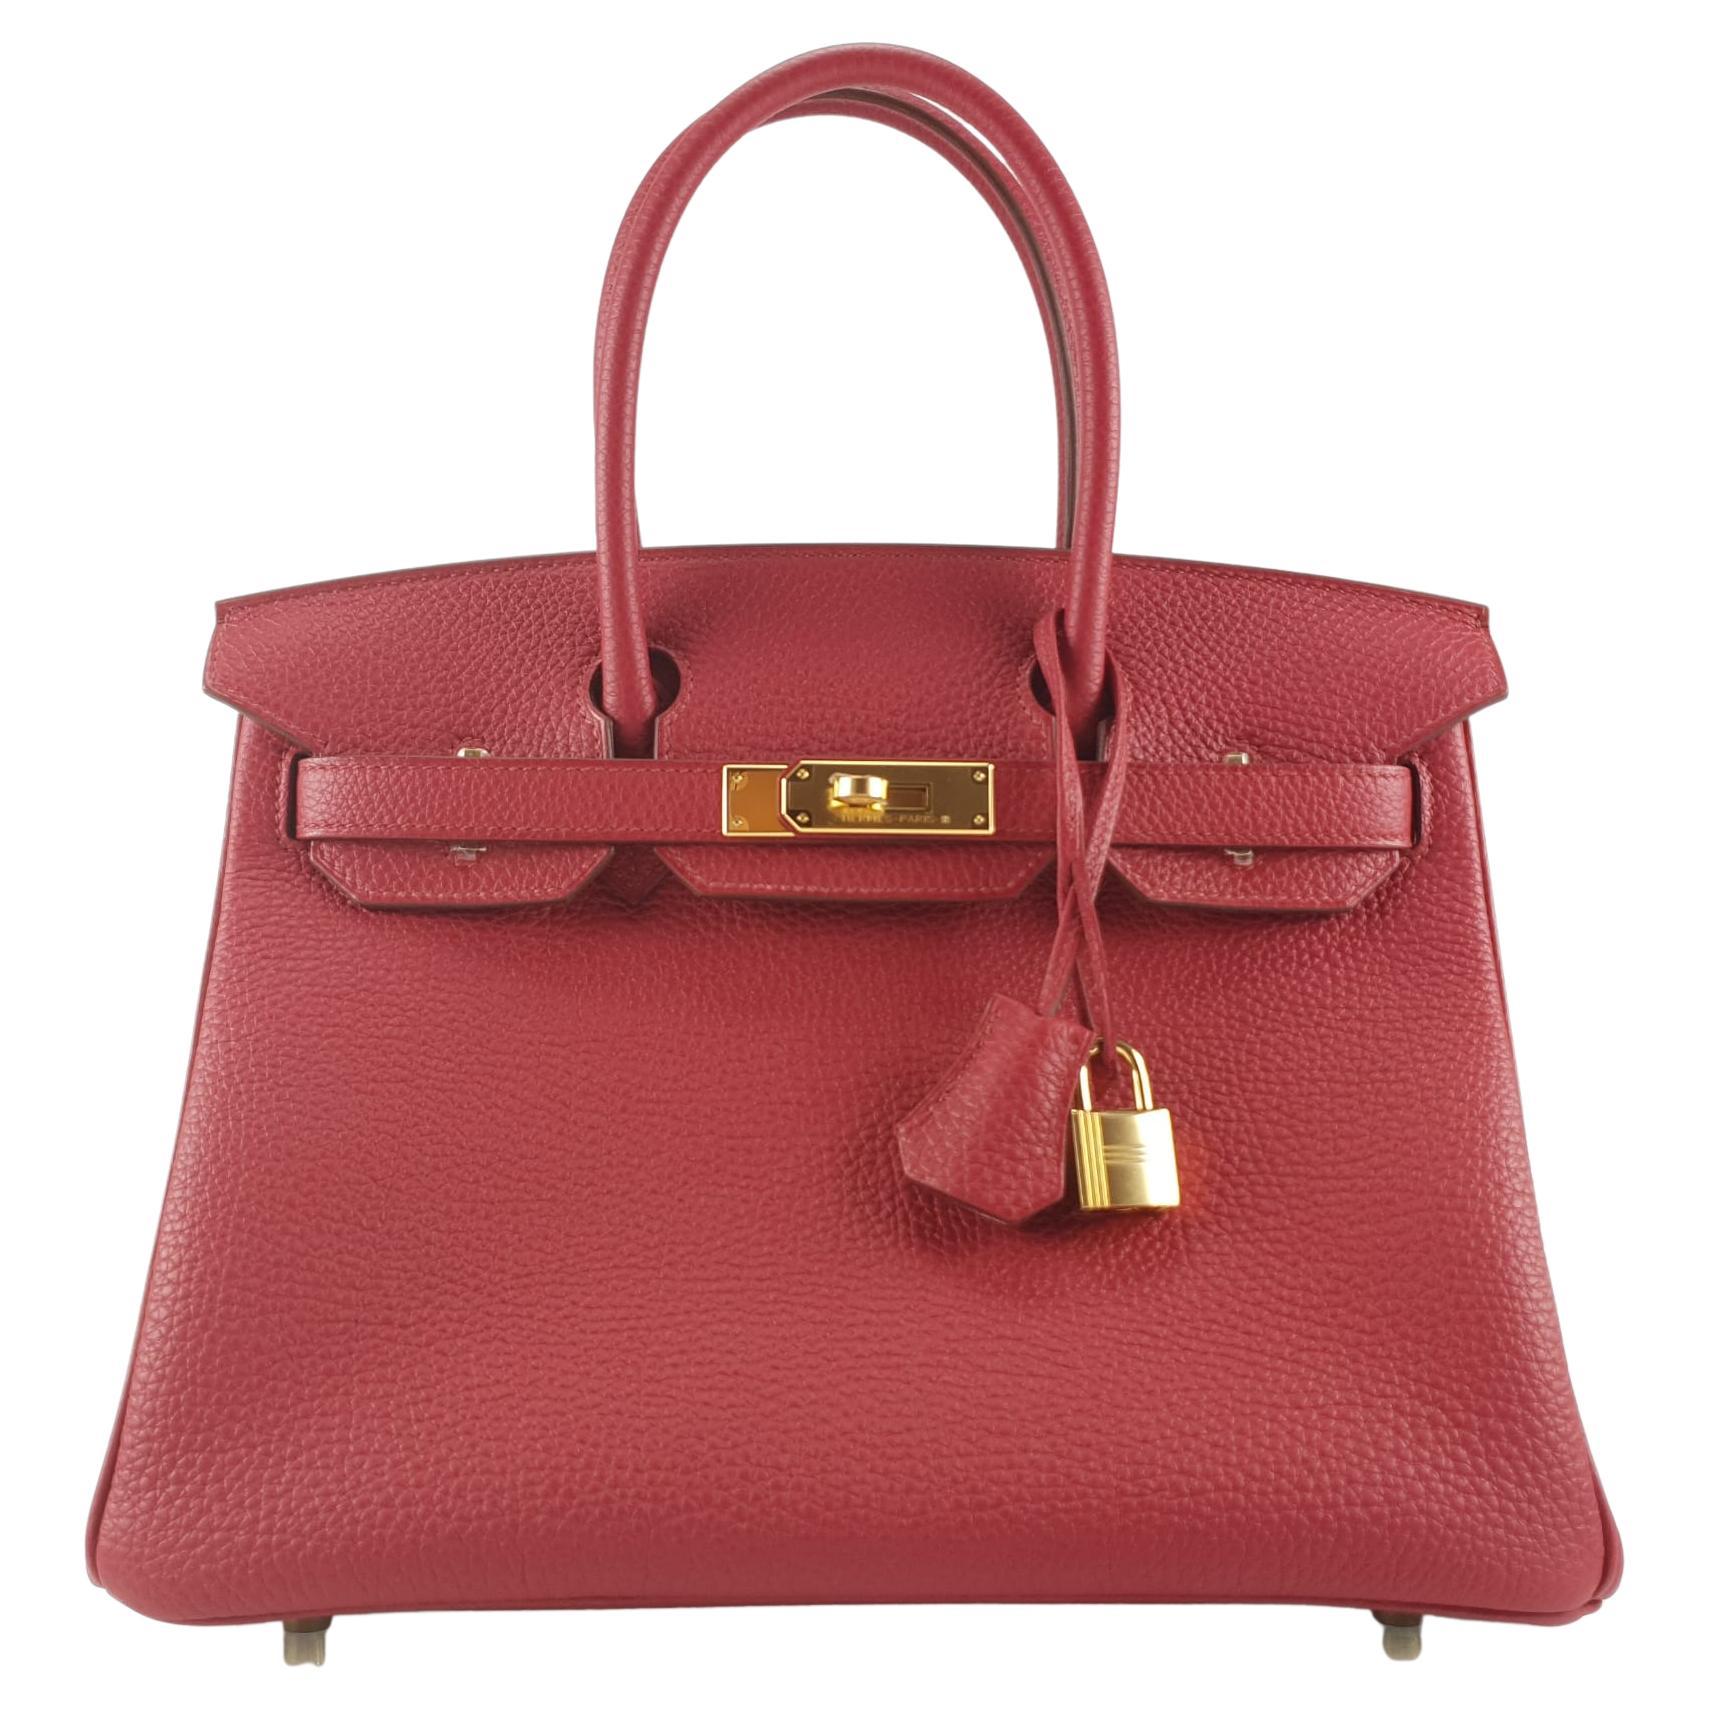 Hermes Birkin 30 Togo Leather Red Ruby  Gold Plated Hardware